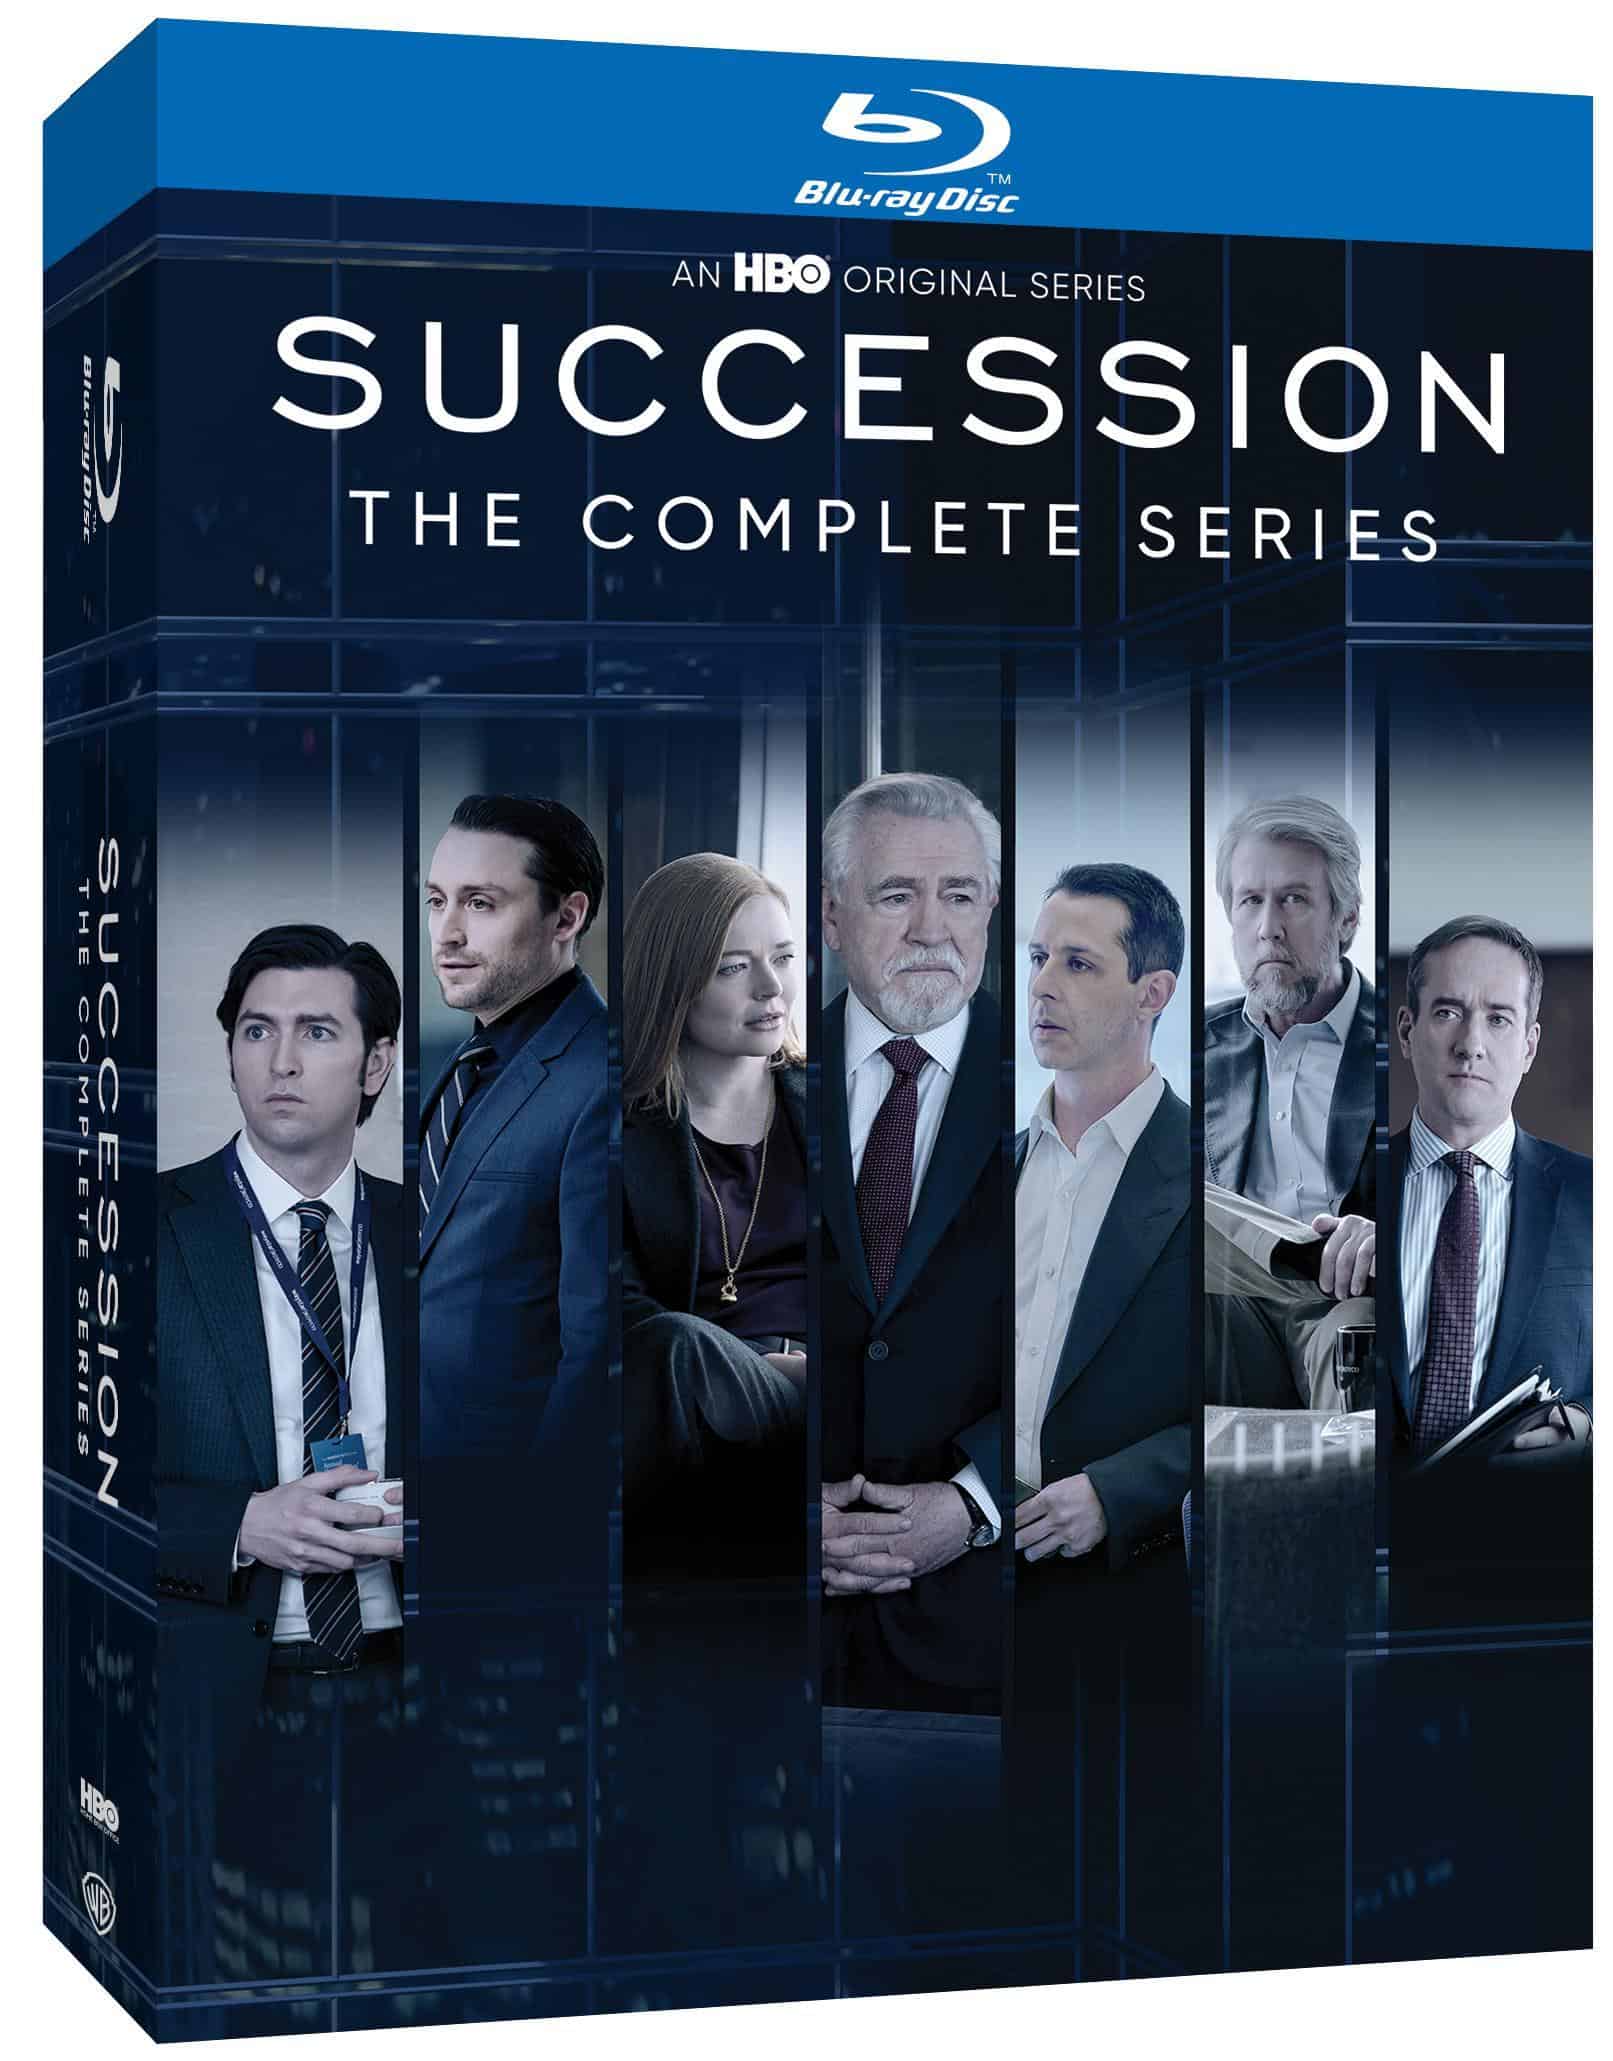 Succession: The Complete Series hits Blu-ray on August 13th 1